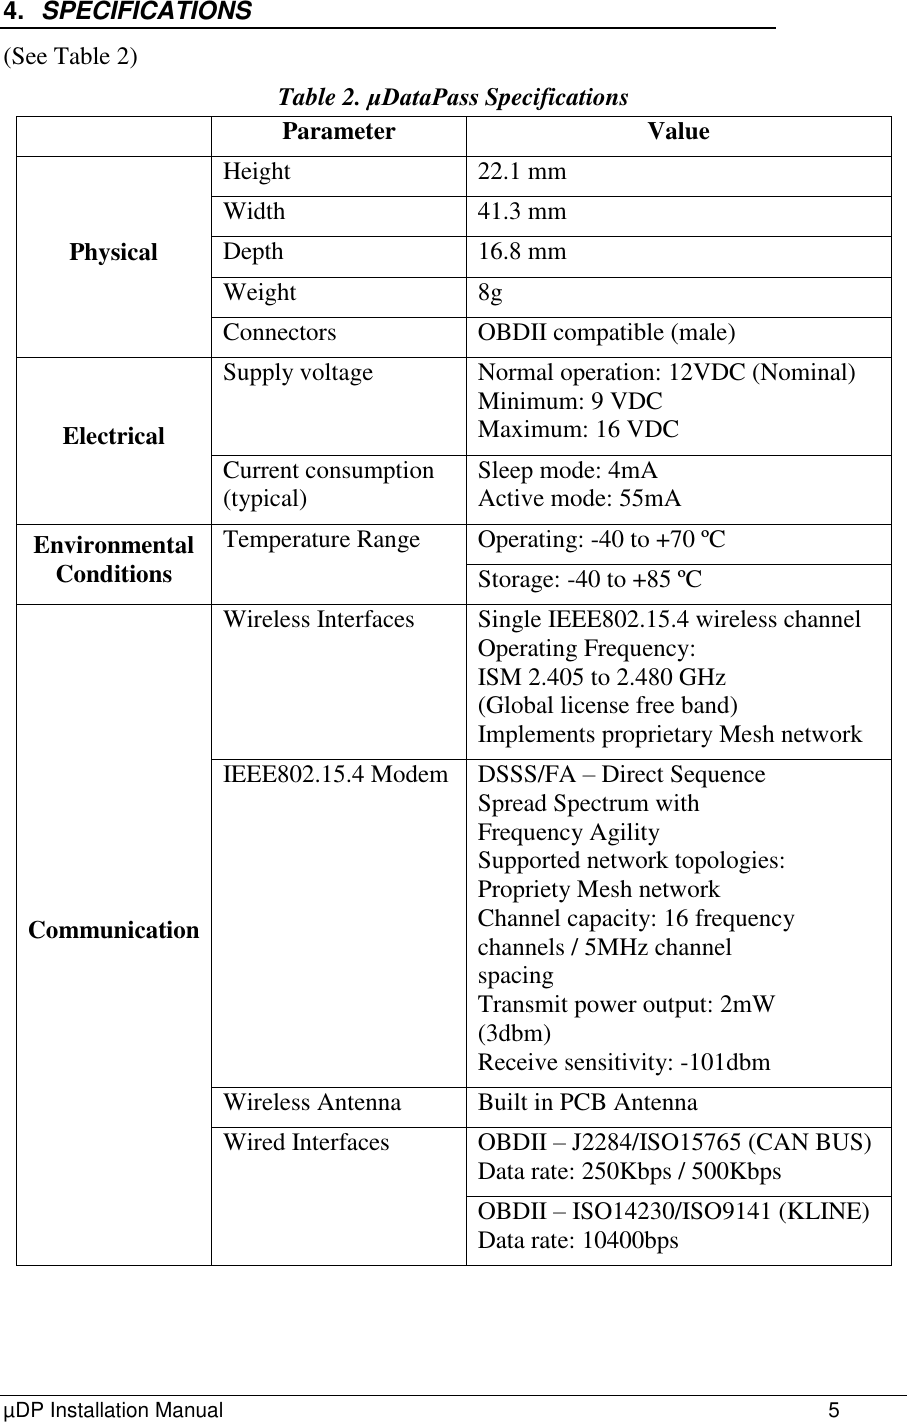 µDP Installation Manual                 5 4. SPECIFICATIONS (See Table 2) Table 2. μDataPass Specifications  Parameter Value Physical Height  22.1 mm Width 41.3 mm Depth 16.8 mm Weight 8g Connectors OBDII compatible (male) Electrical Supply voltage Normal operation: 12VDC (Nominal) Minimum: 9 VDC Maximum: 16 VDC Current consumption (typical) Sleep mode: 4mA Active mode: 55mA Environmental Conditions Temperature Range Operating: -40 to +70 ºC Storage: -40 to +85 ºC Communication Wireless Interfaces Single IEEE802.15.4 wireless channel Operating Frequency:  ISM 2.405 to 2.480 GHz (Global license free band)  Implements proprietary Mesh network IEEE802.15.4 Modem DSSS/FA – Direct Sequence Spread Spectrum with Frequency Agility Supported network topologies: Propriety Mesh network Channel capacity: 16 frequency channels / 5MHz channel spacing  Transmit power output: 2mW (3dbm) Receive sensitivity: -101dbm Wireless Antenna Built in PCB Antenna Wired Interfaces OBDII – J2284/ISO15765 (CAN BUS) Data rate: 250Kbps / 500Kbps OBDII – ISO14230/ISO9141 (KLINE) Data rate: 10400bps 